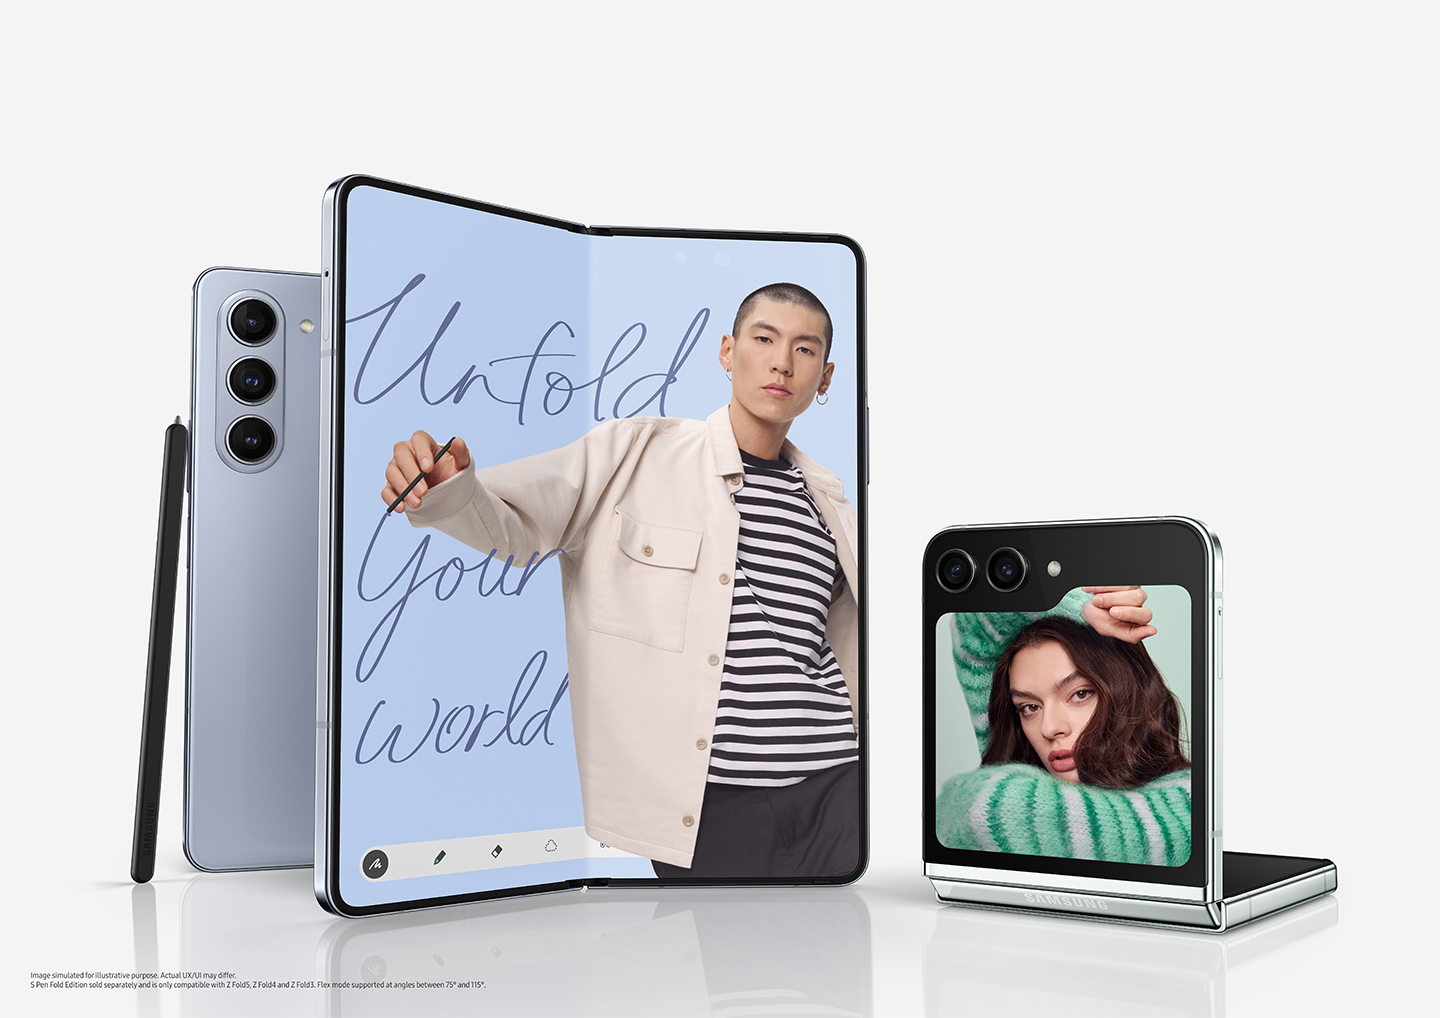 Image to illustrate the release of Galaxy Z Flip5 and Galaxy Z Fold5